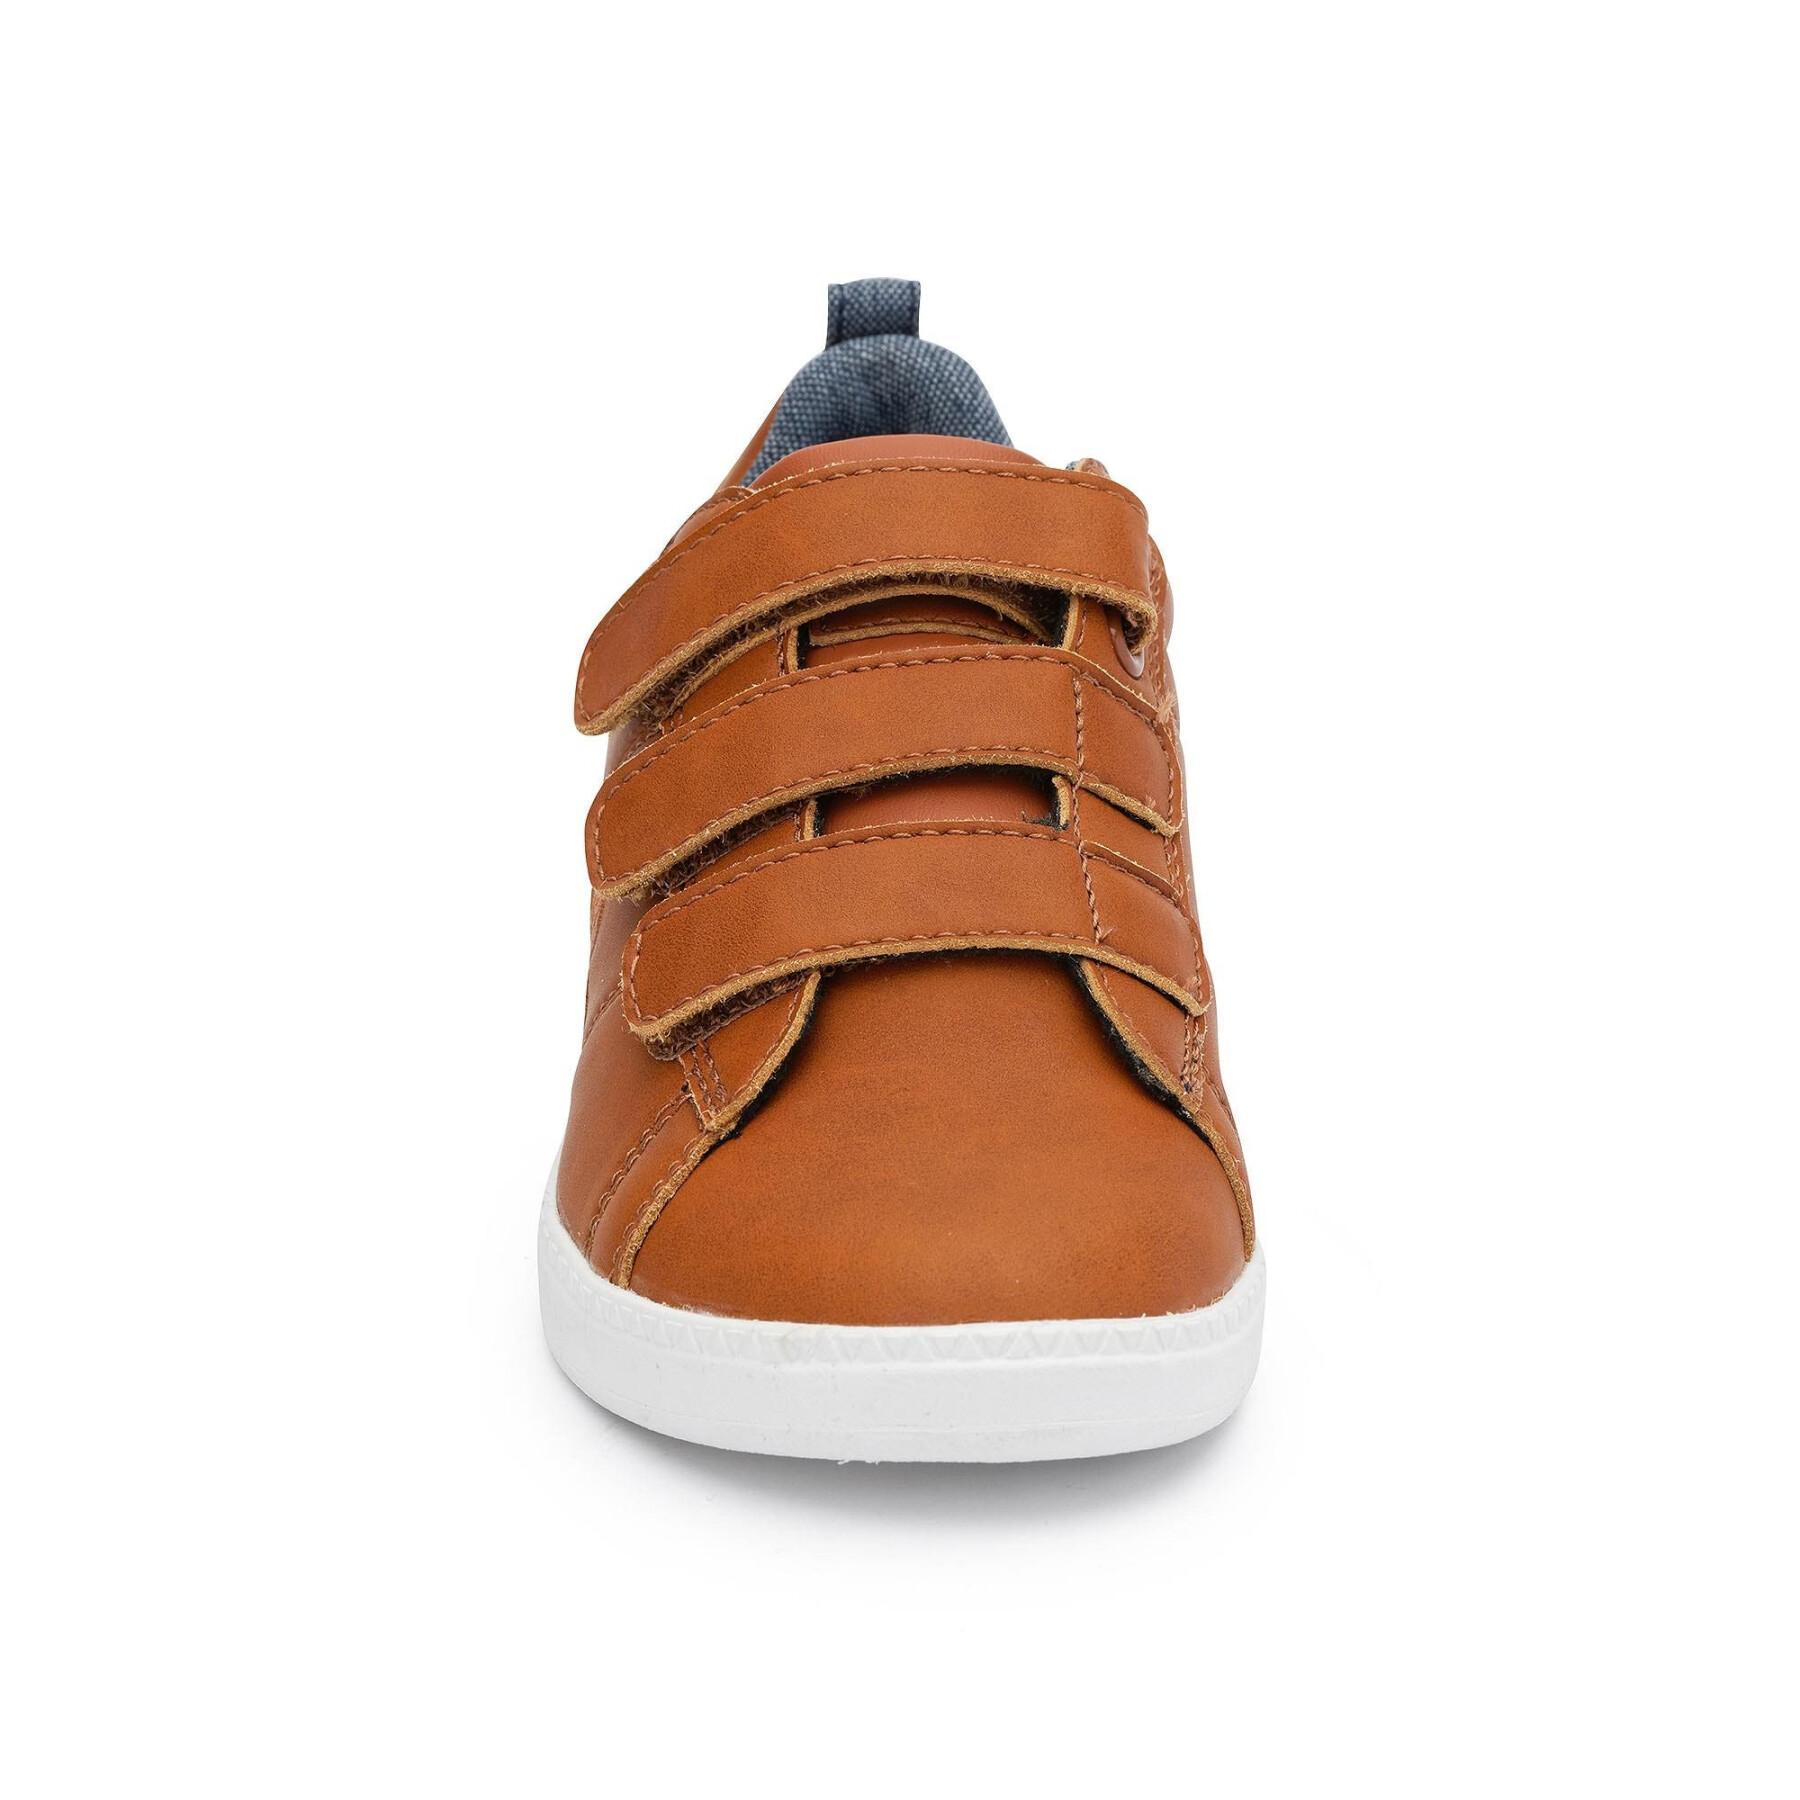 Children's sneakers Le Coq Sportif Courtclassic PS Workwear